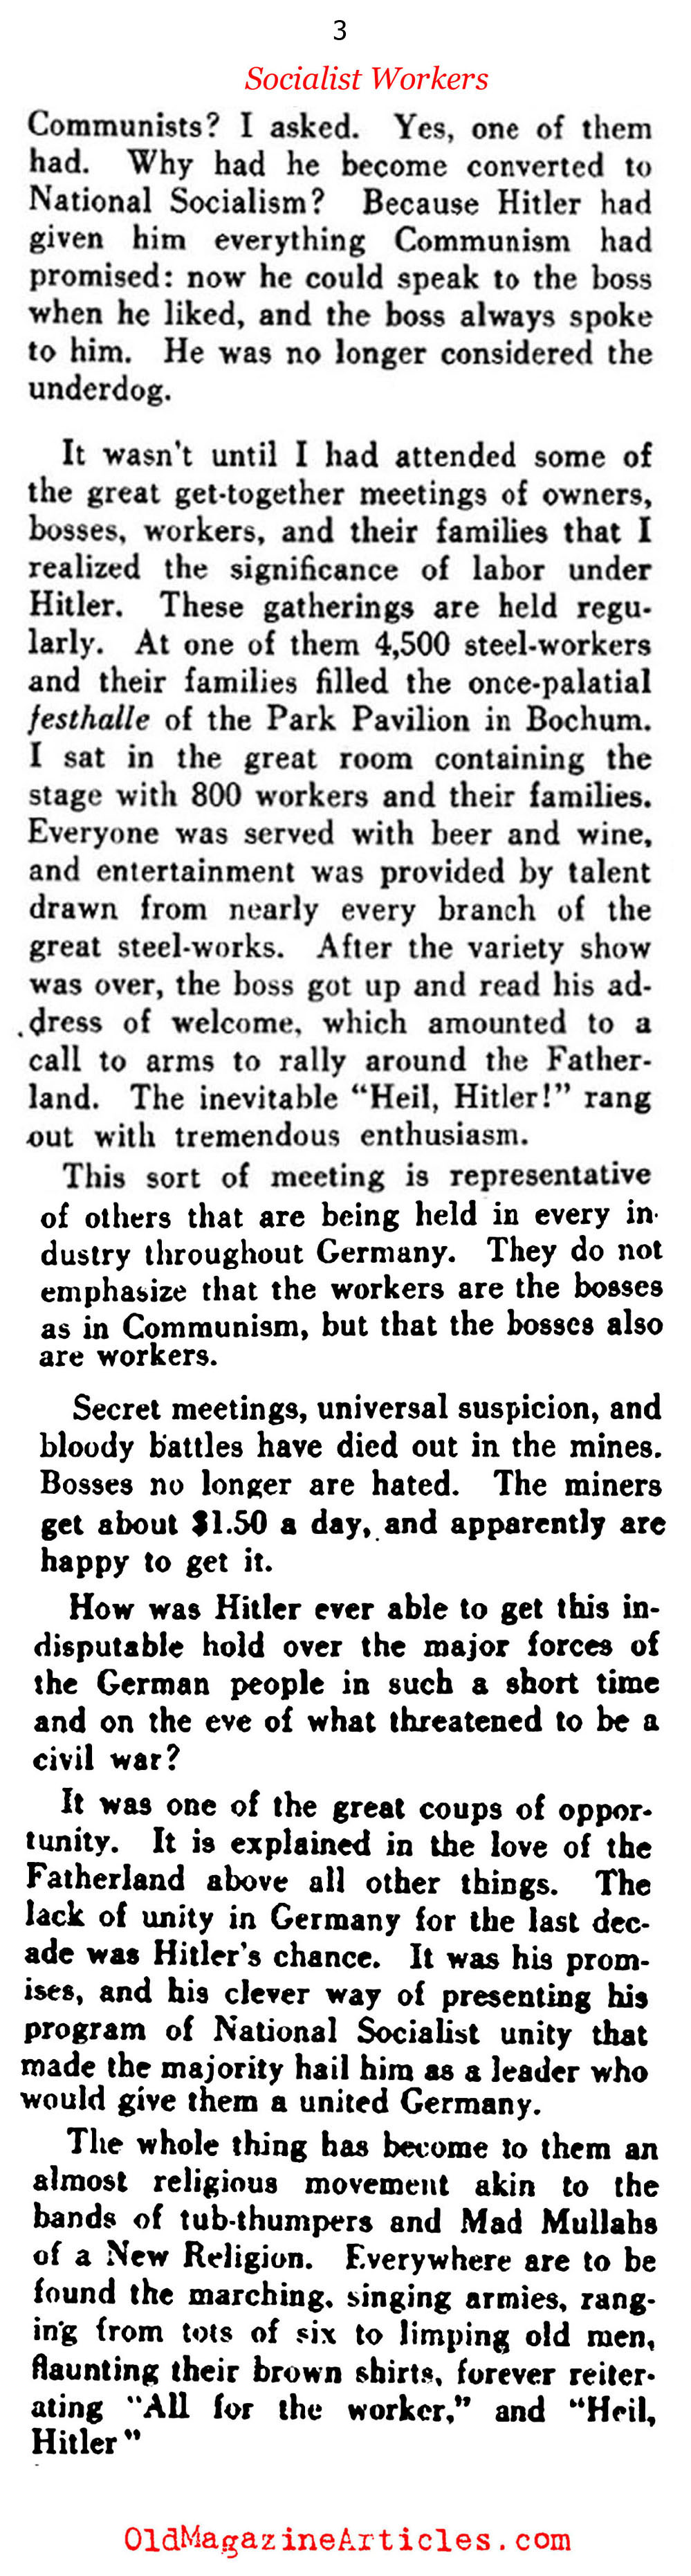 A Socialist Remedy for Nazi-Germany's Labor Questions (Literary Digest, 1935)